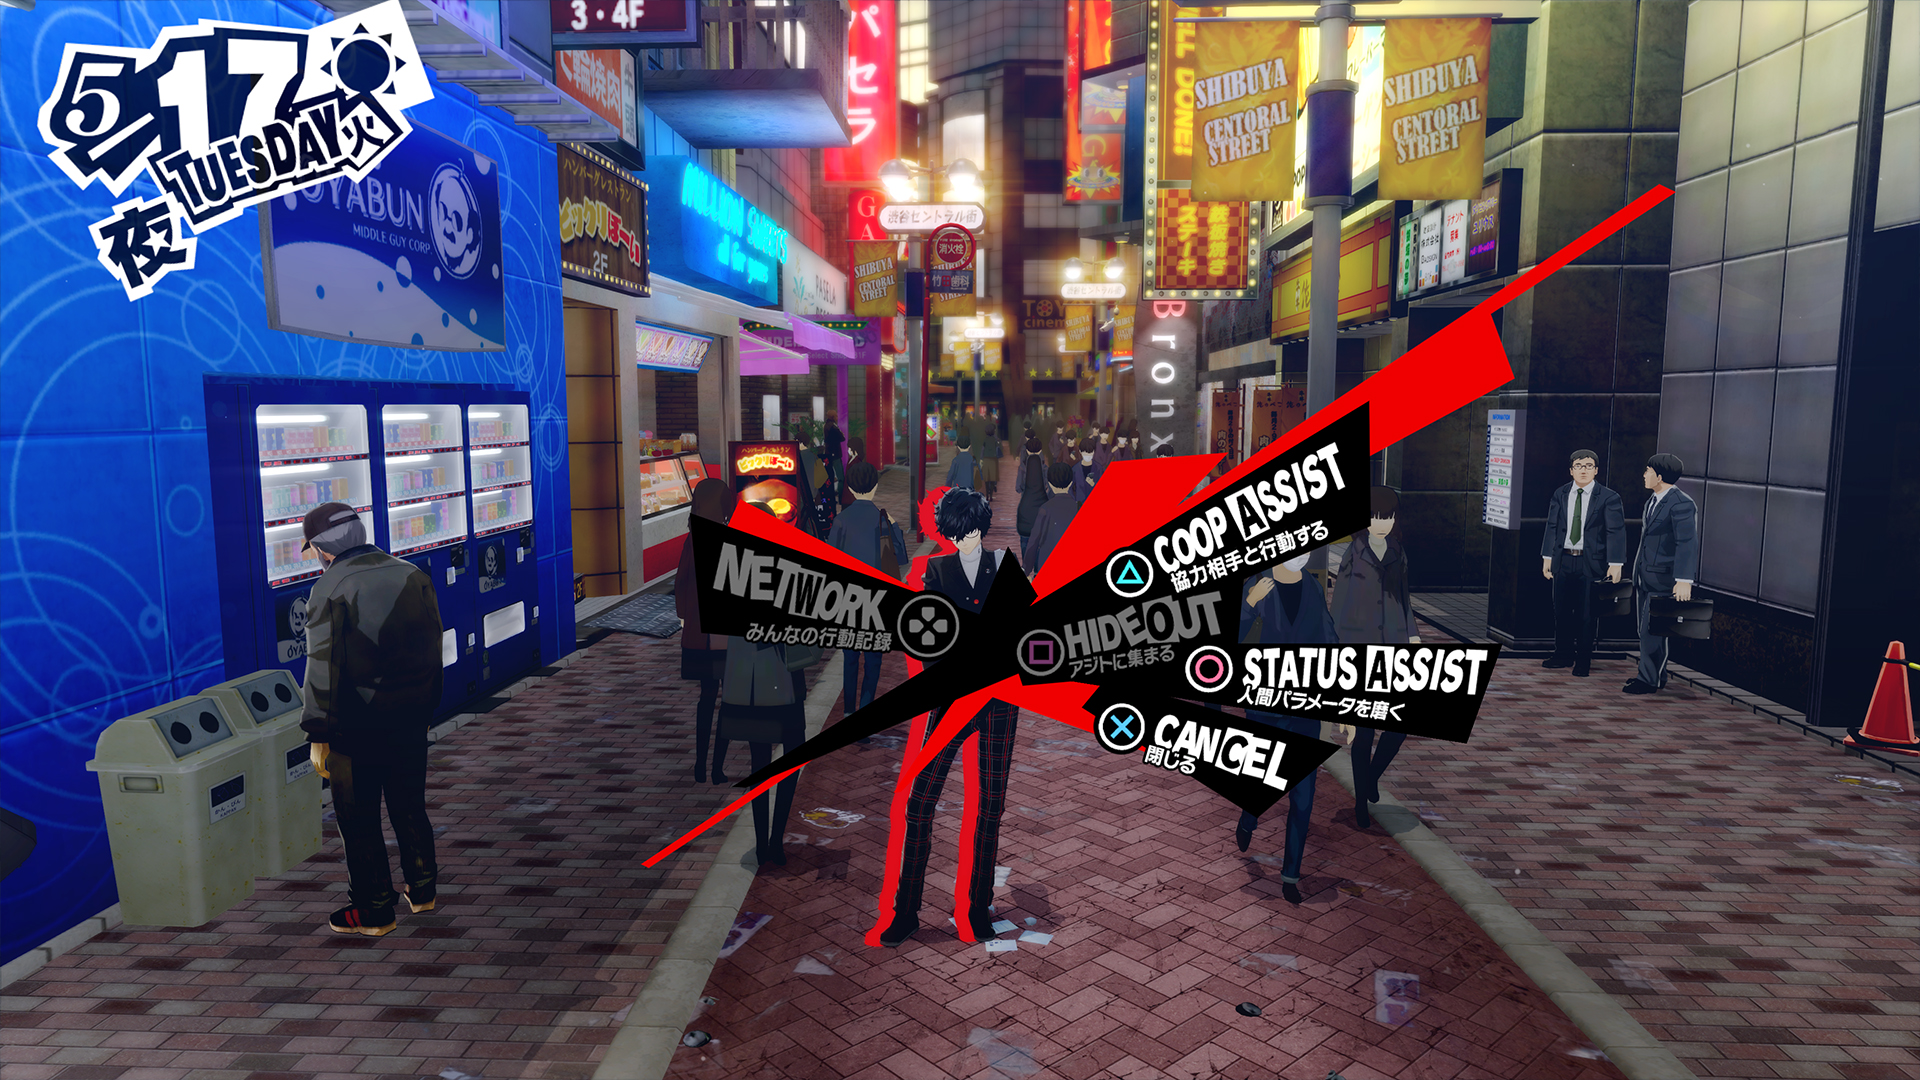 Summary Of The Persona 5 Royal Info From The Trailer And Website Includes P5 Spoilers Persona5